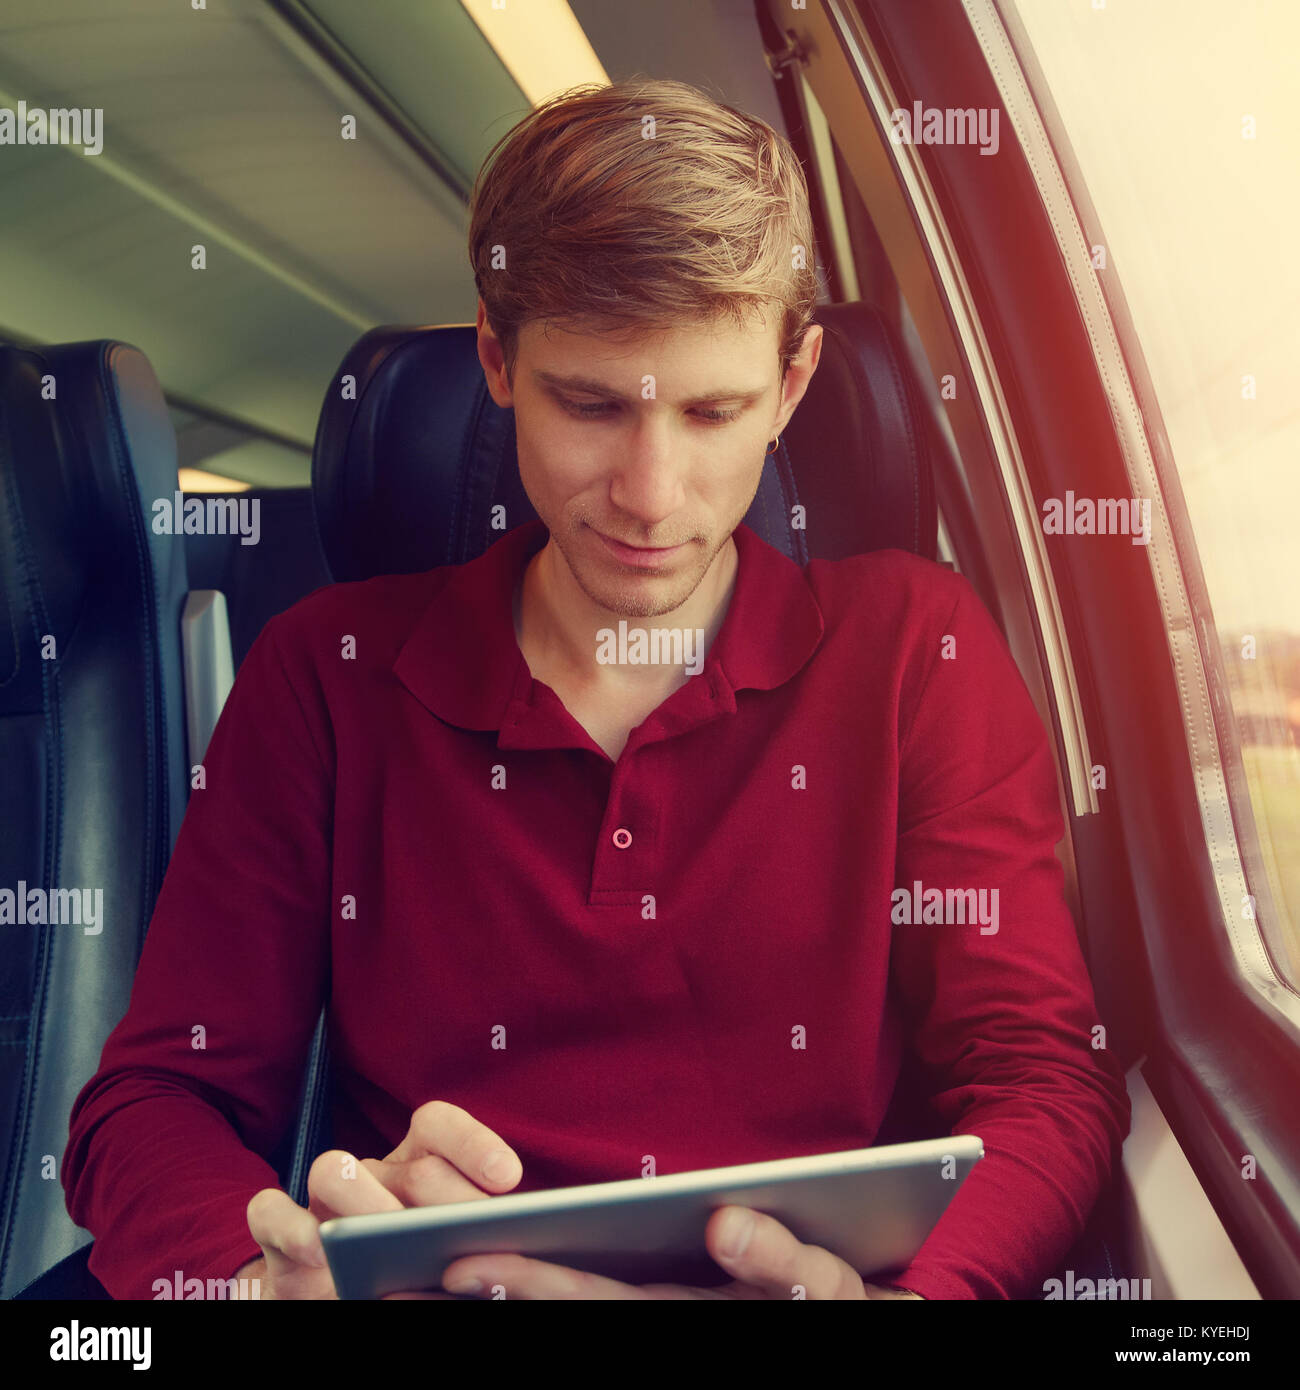 handsome man riding on a train Stock Photo